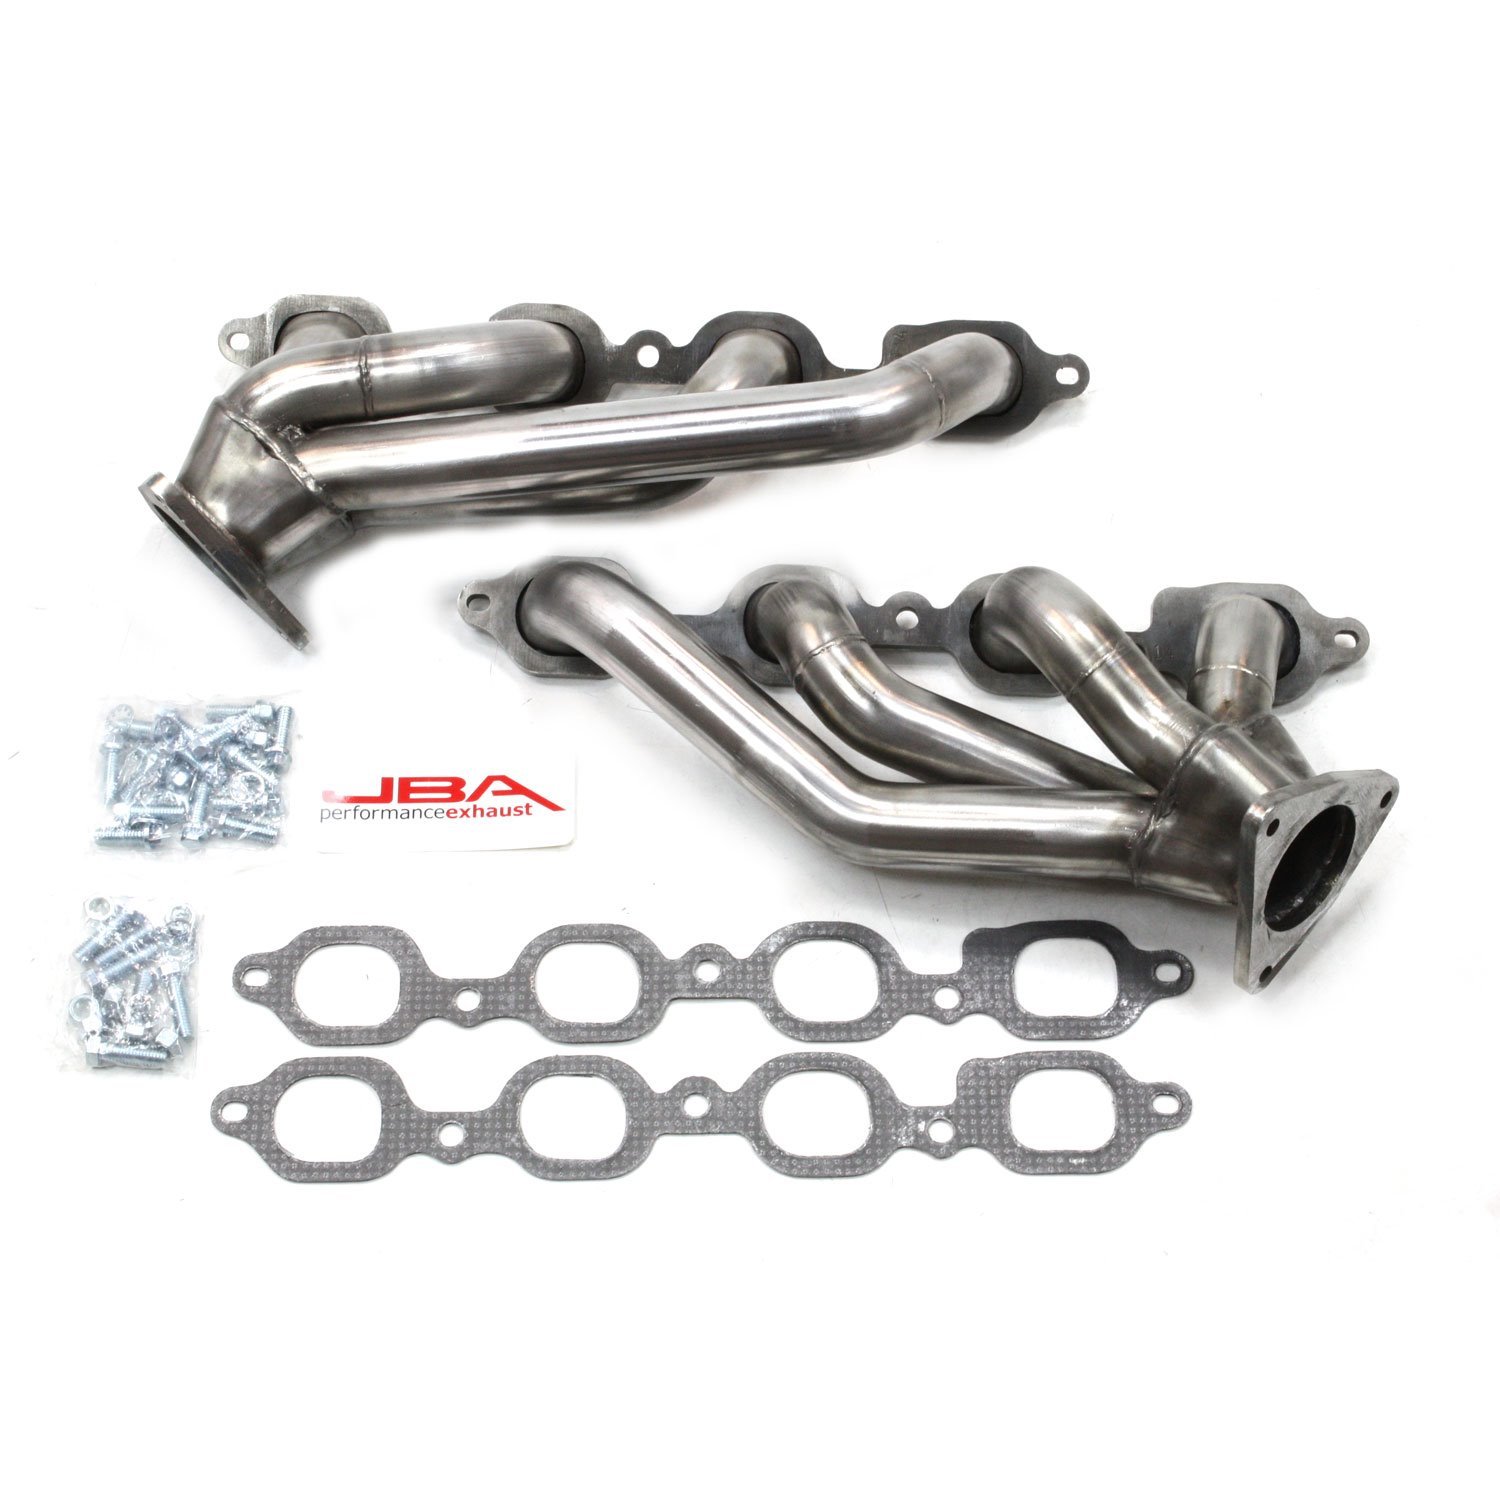 Performance Exhaust 1850S-4 1 5/8" Header Shorty Stainless Steel 2014-2016 GM Truck/SUV 5.3/6.2L